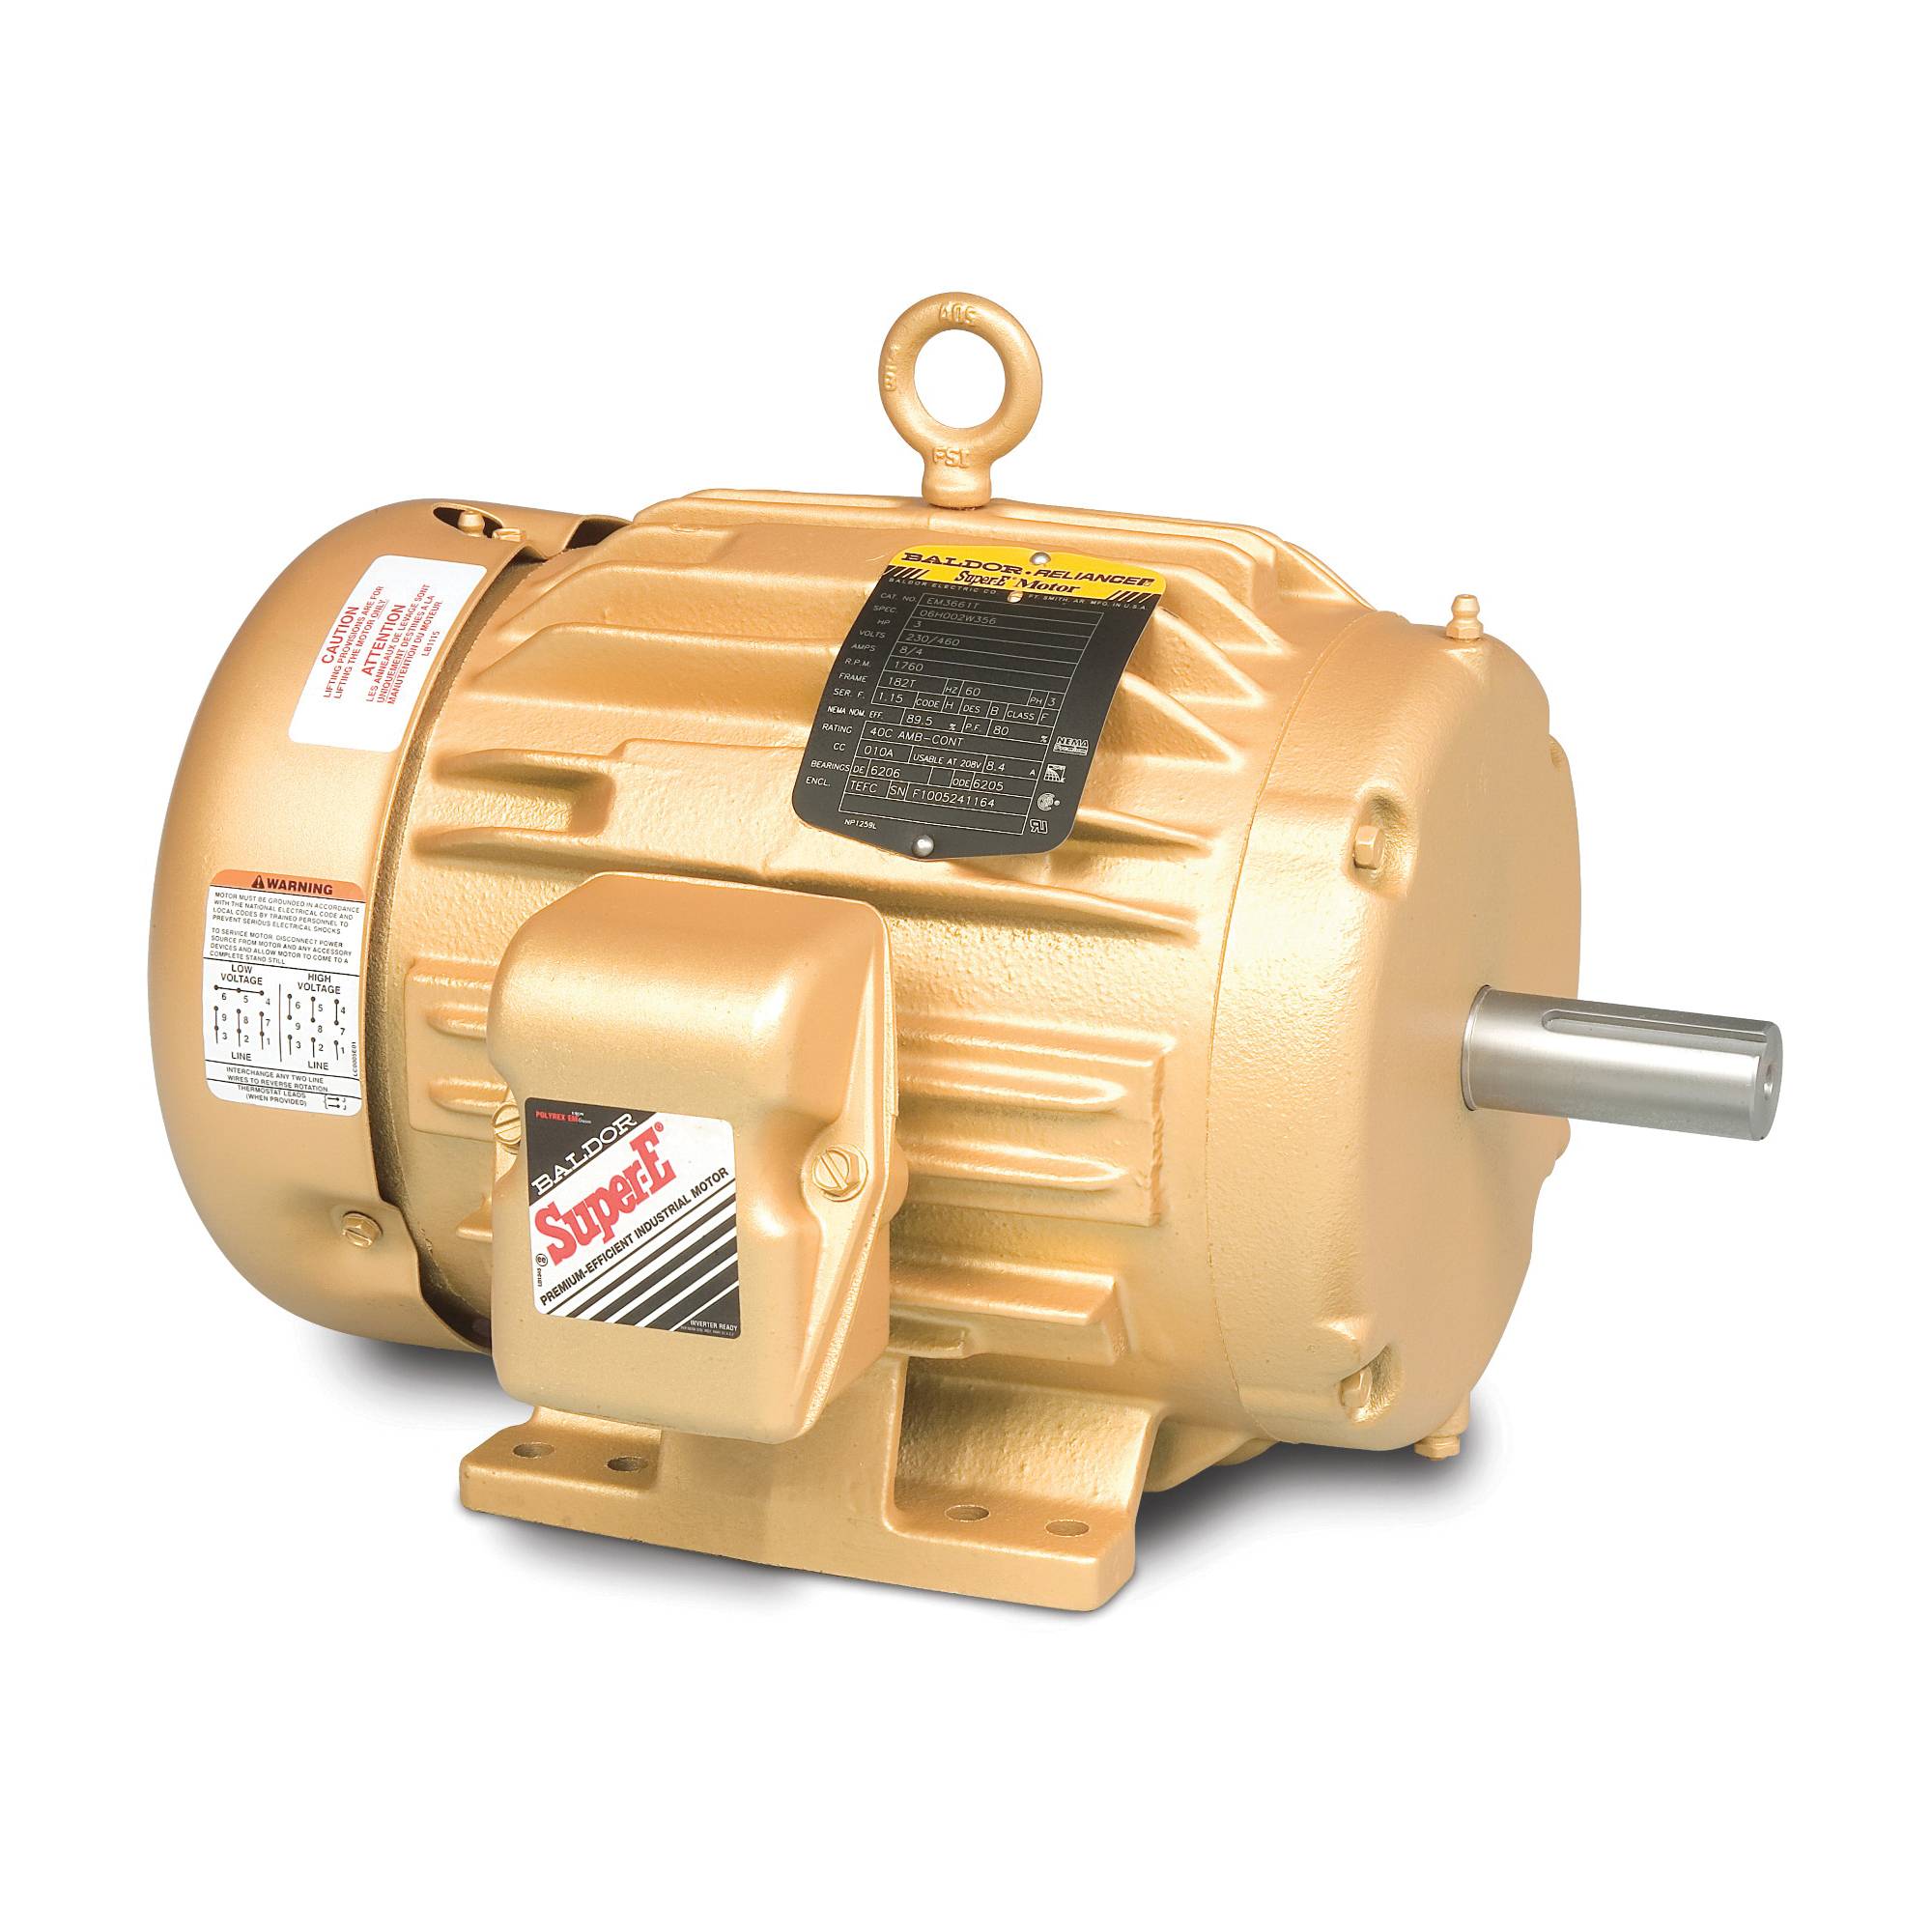 Baldor-Reliance EM3769T Type 0726M Continuous Duty AC Motor, Totally Enclosed Fan Cooled Enclosure, 7-1/2 hp, 208/230/460 VAC, 60 Hz, 3 Phase, 213T Frame, 3510 rpm Speed, Foot Rigid Mount